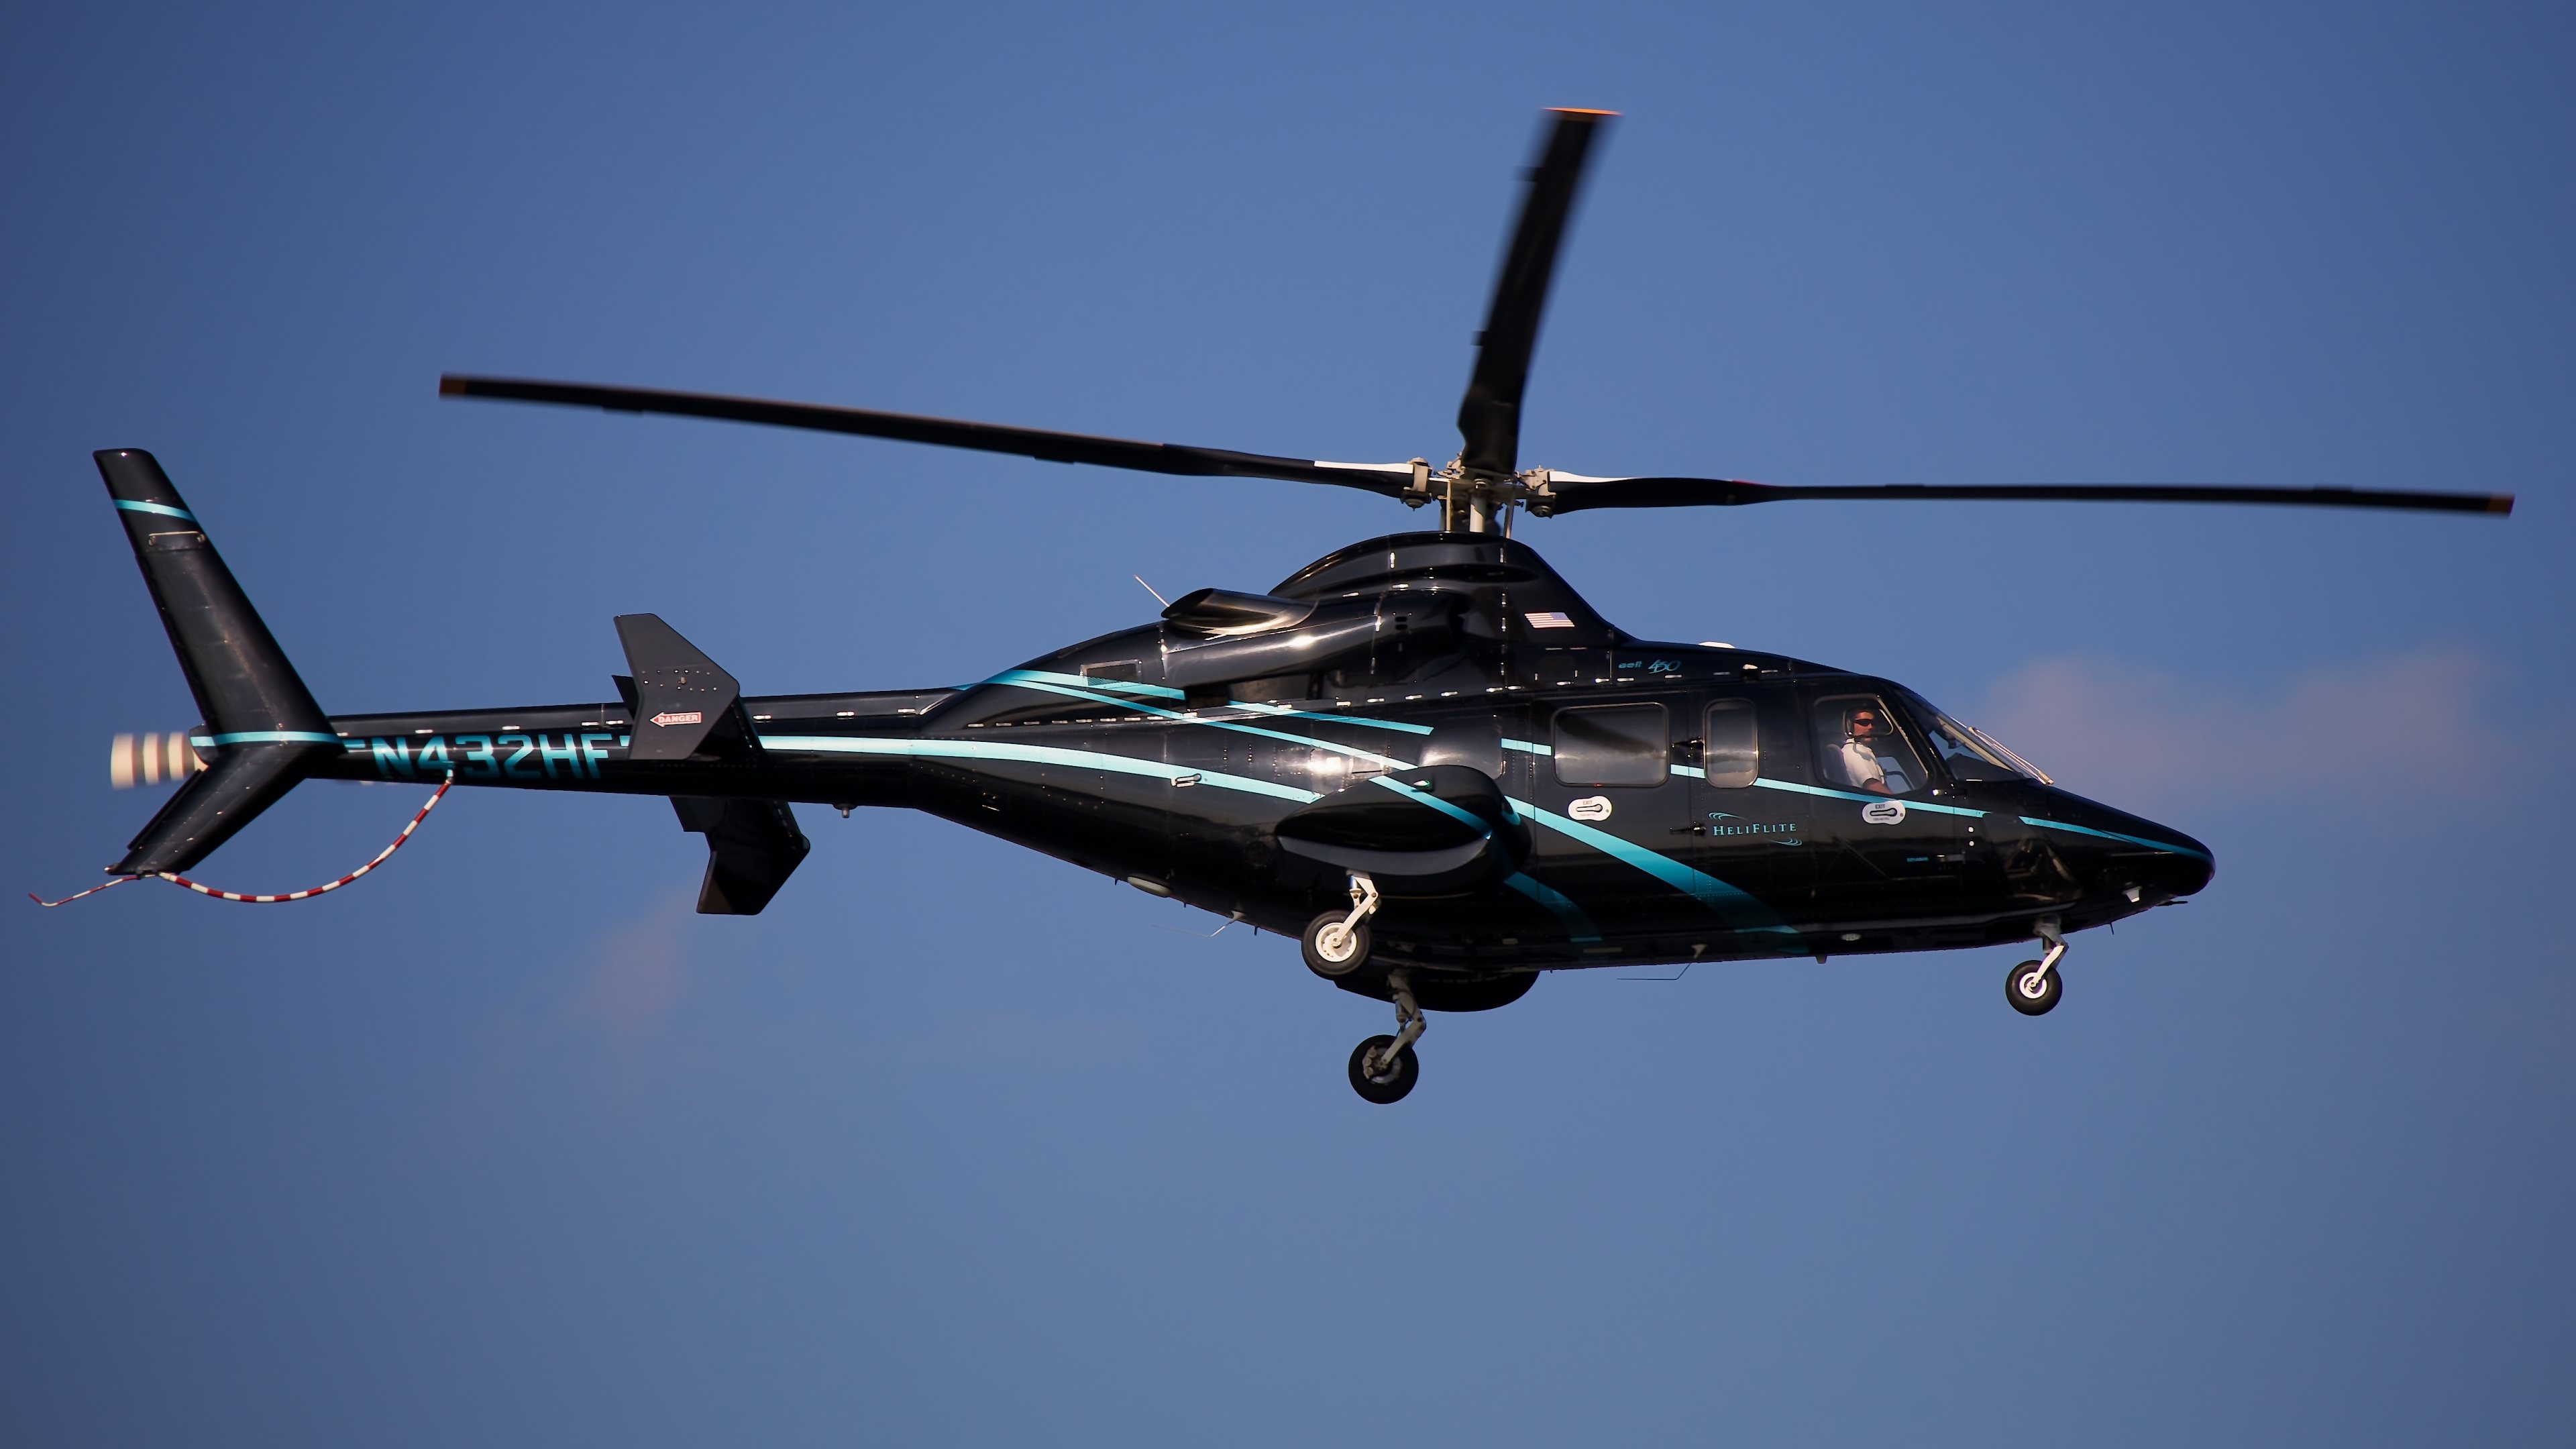 Bell Helicopter, Free download wallpaper, Bell helicopter toolbar, Explore UHD phone wallpaper, 3840x2160 4K Desktop